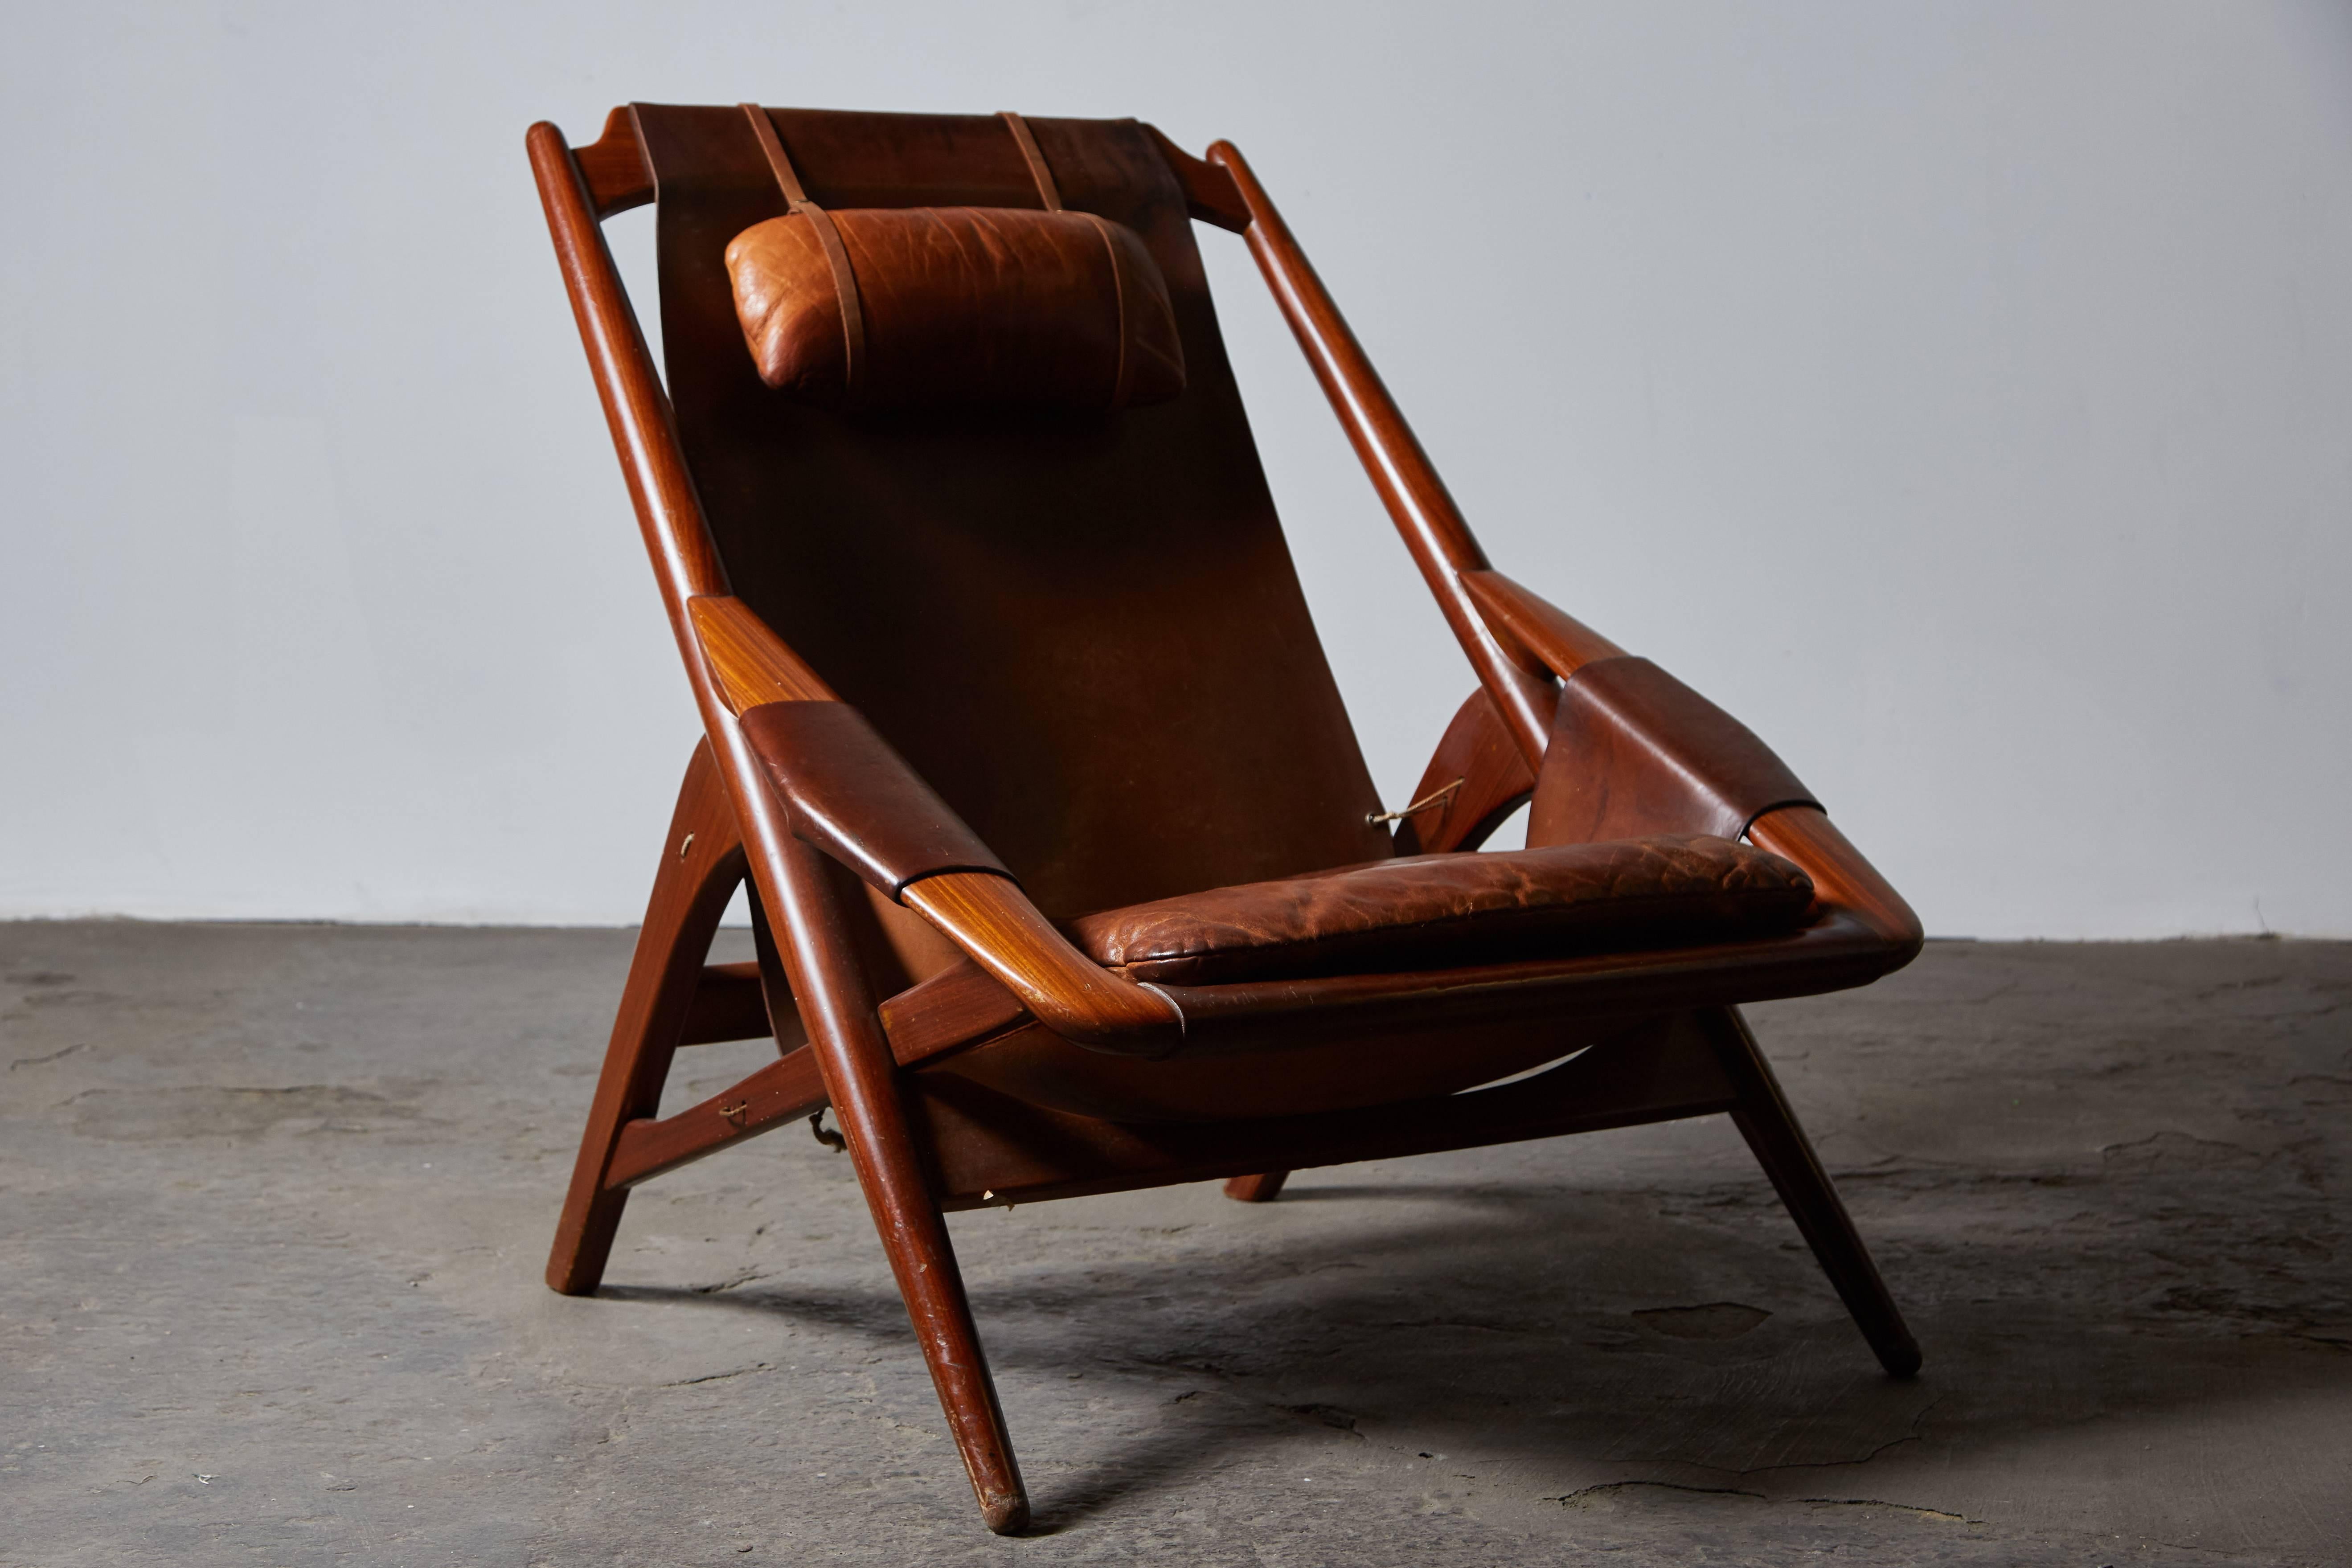 Patinated leather lounge chair by W.D. Andersag for Ideal Piacenza in Brescia, Italy, circa 1950s.